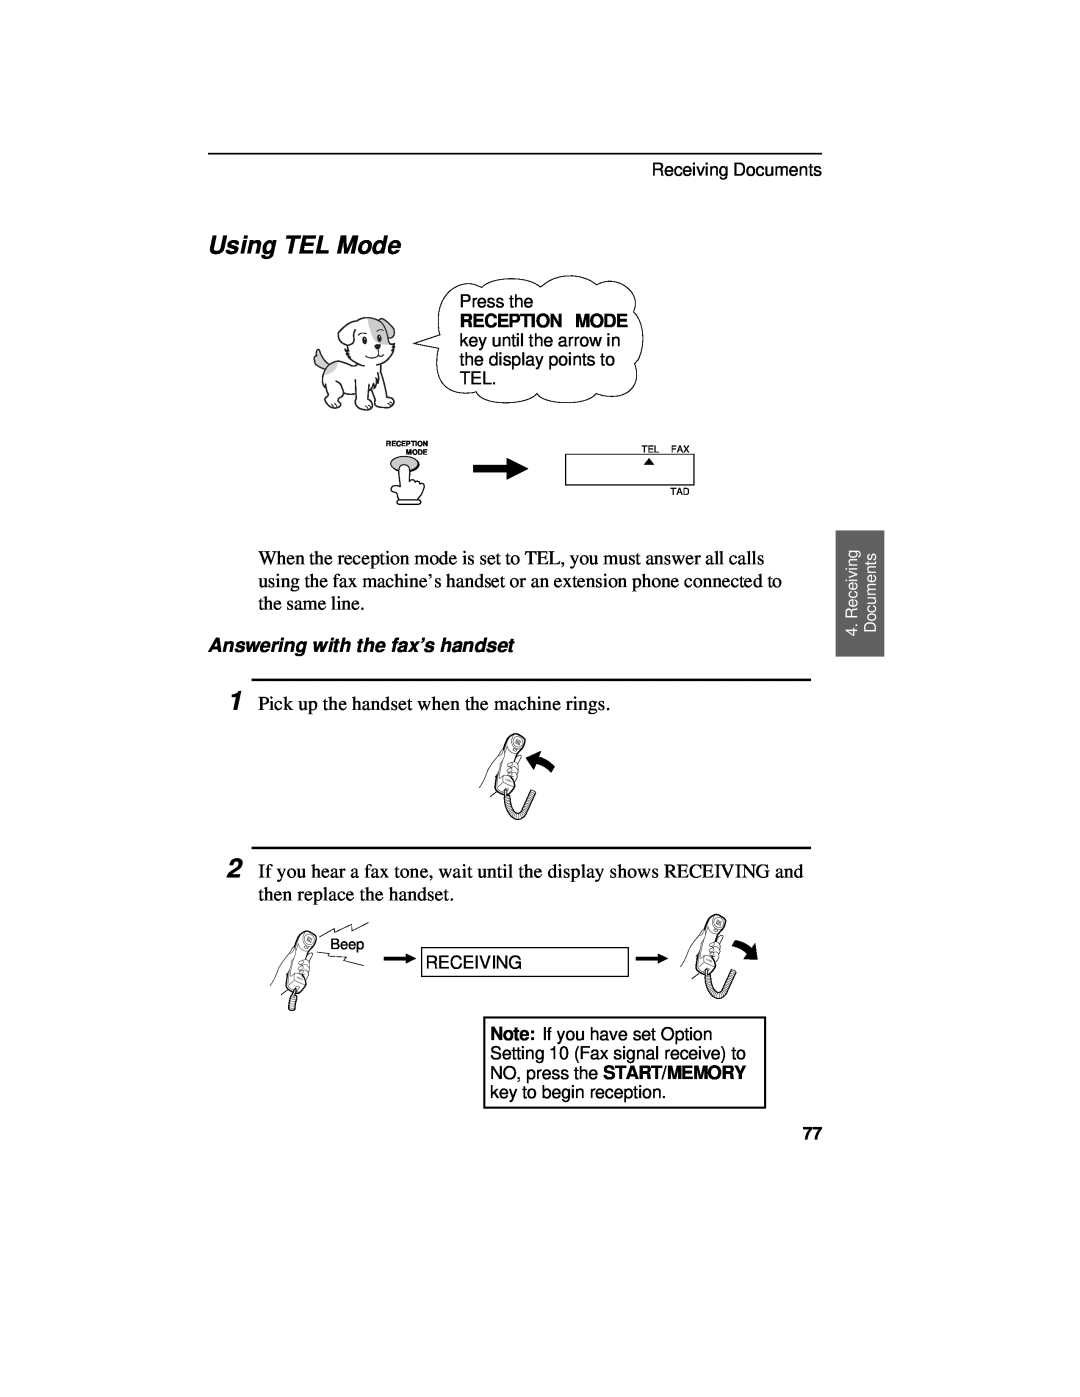 Sharp UX-460 operation manual Using TEL Mode, Answering with the fax’s handset 